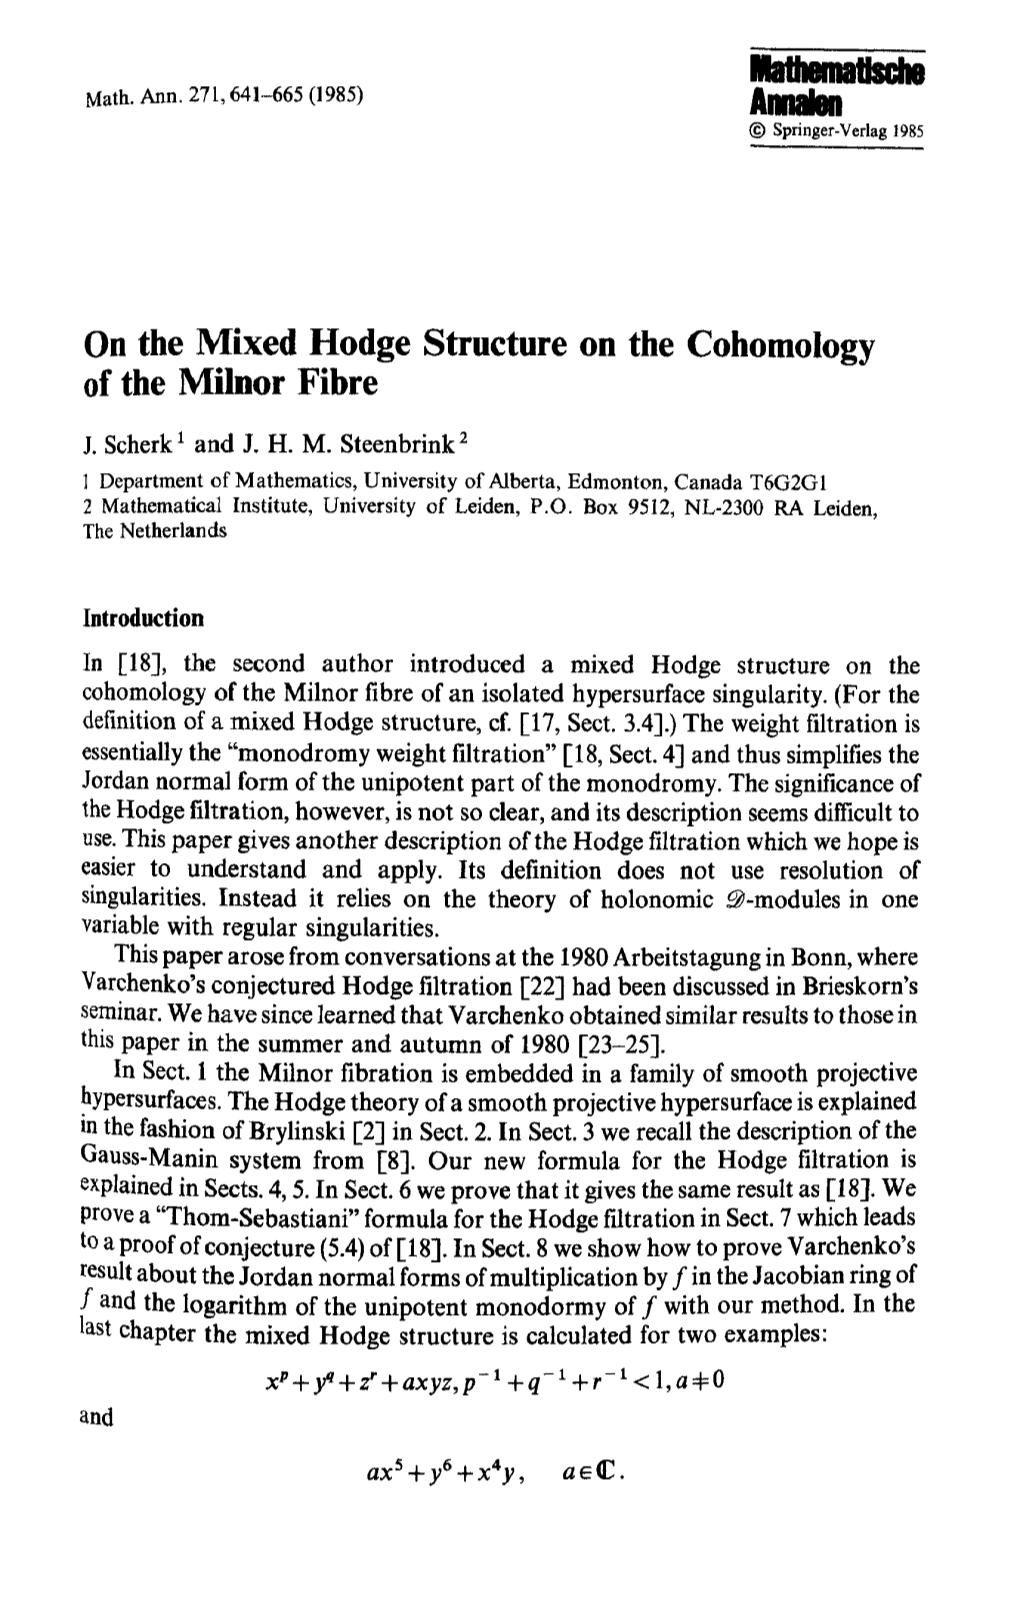 On the Mixed Hodge Structure on the Cohomology of the Milnor Fibre